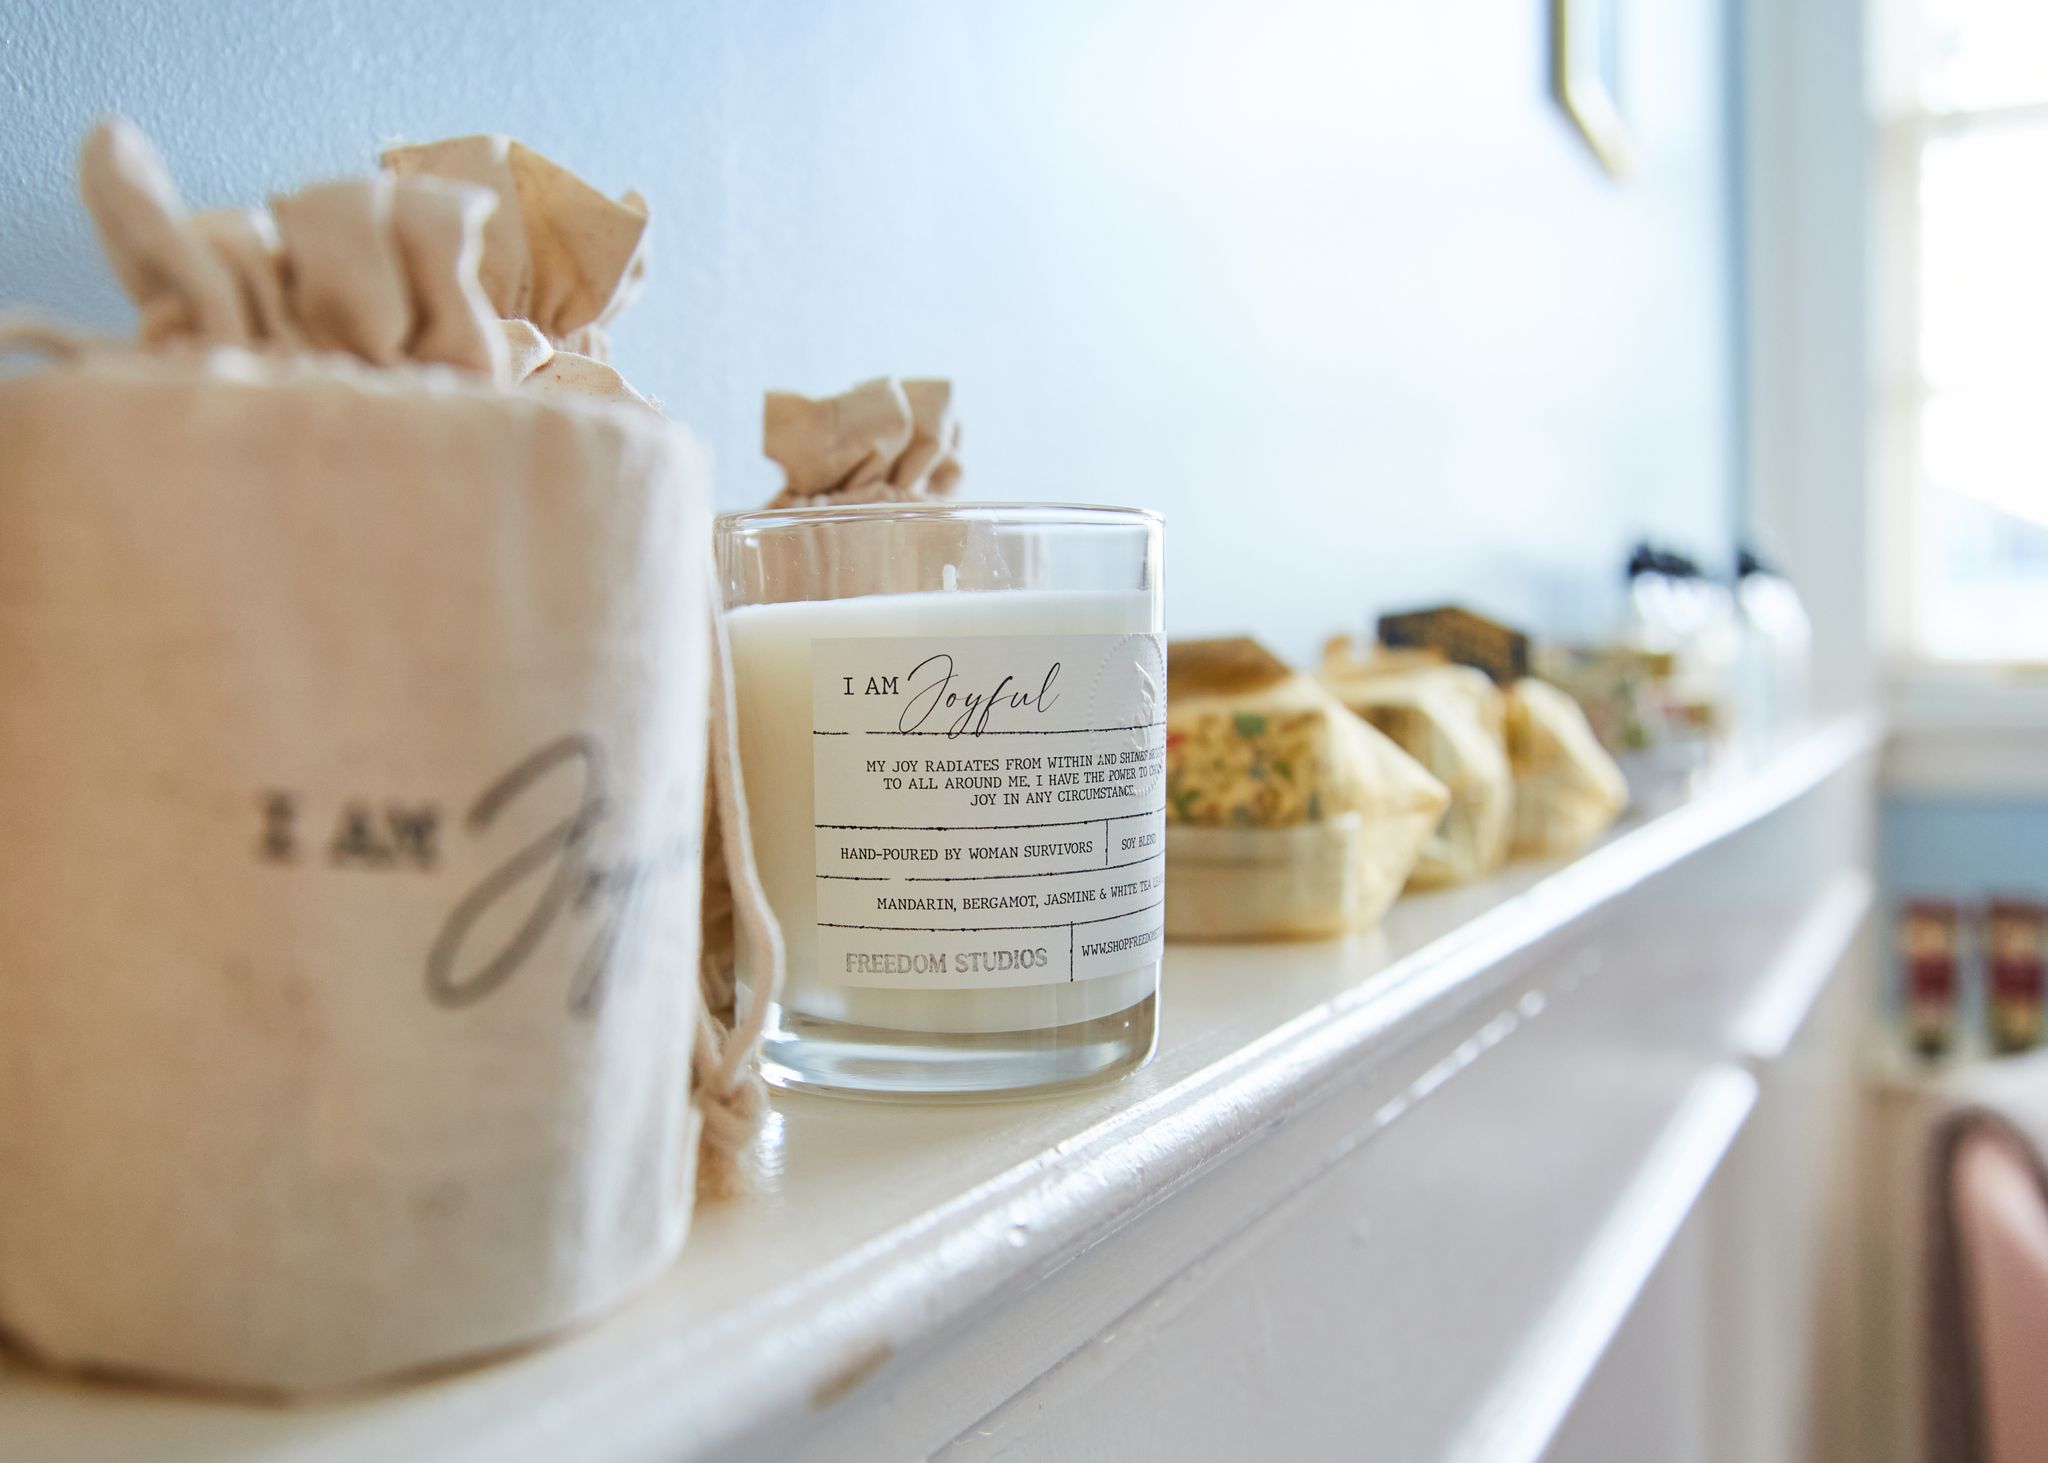 A candle that says "joy" sits on a ledge of the home decor shop.